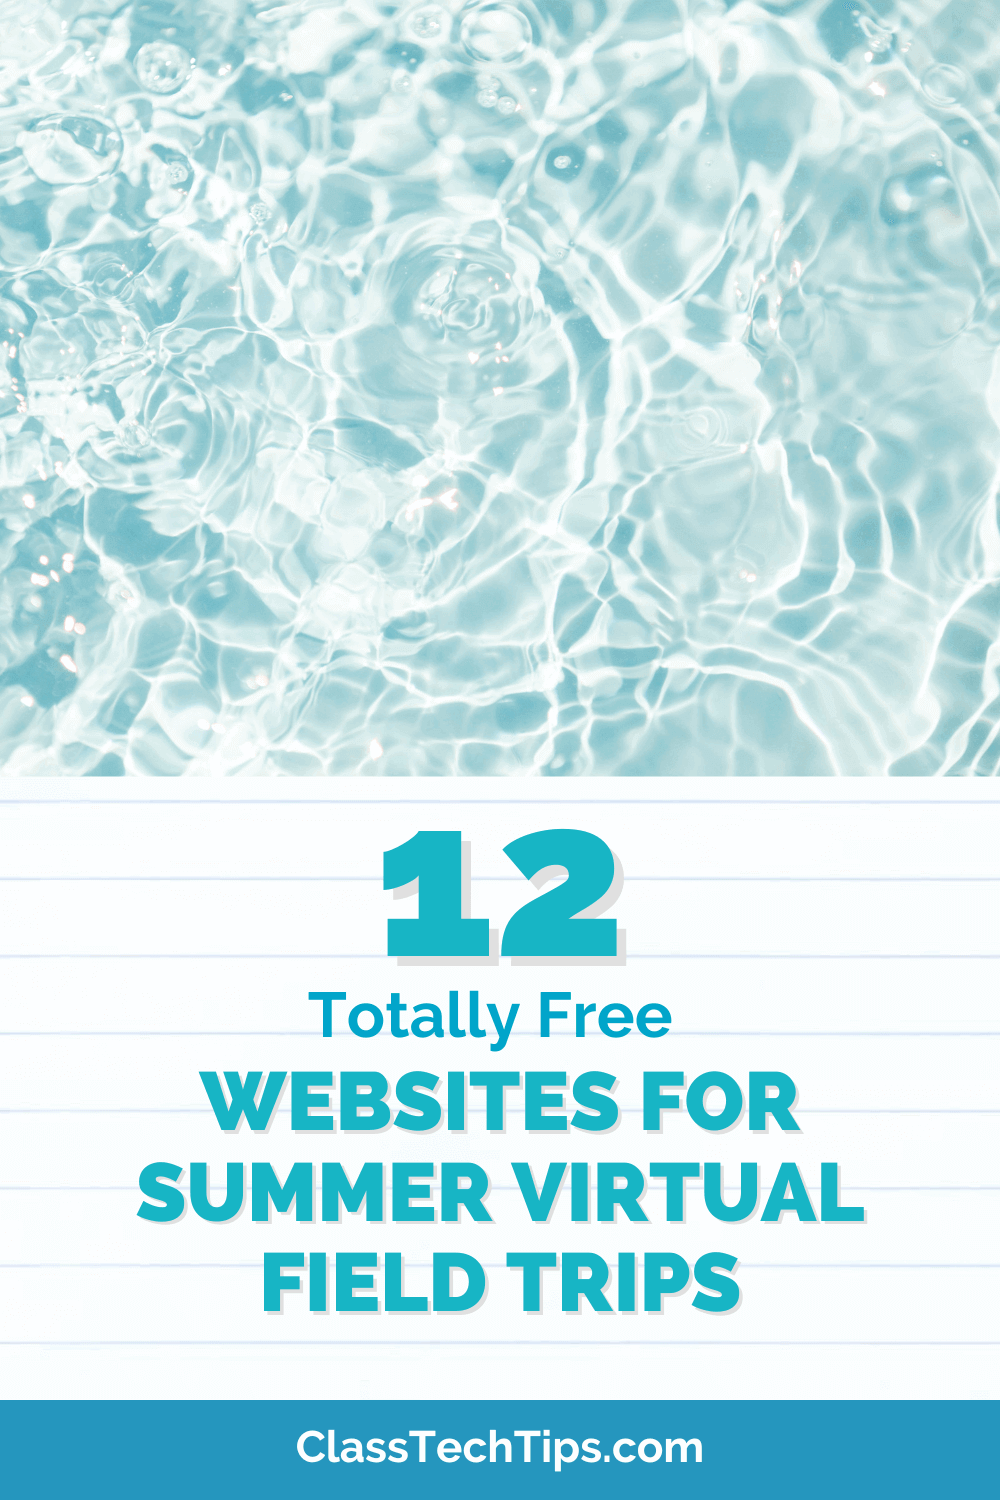 Featured image of serene water scene, representing refreshing summer virtual field trips for students and families.